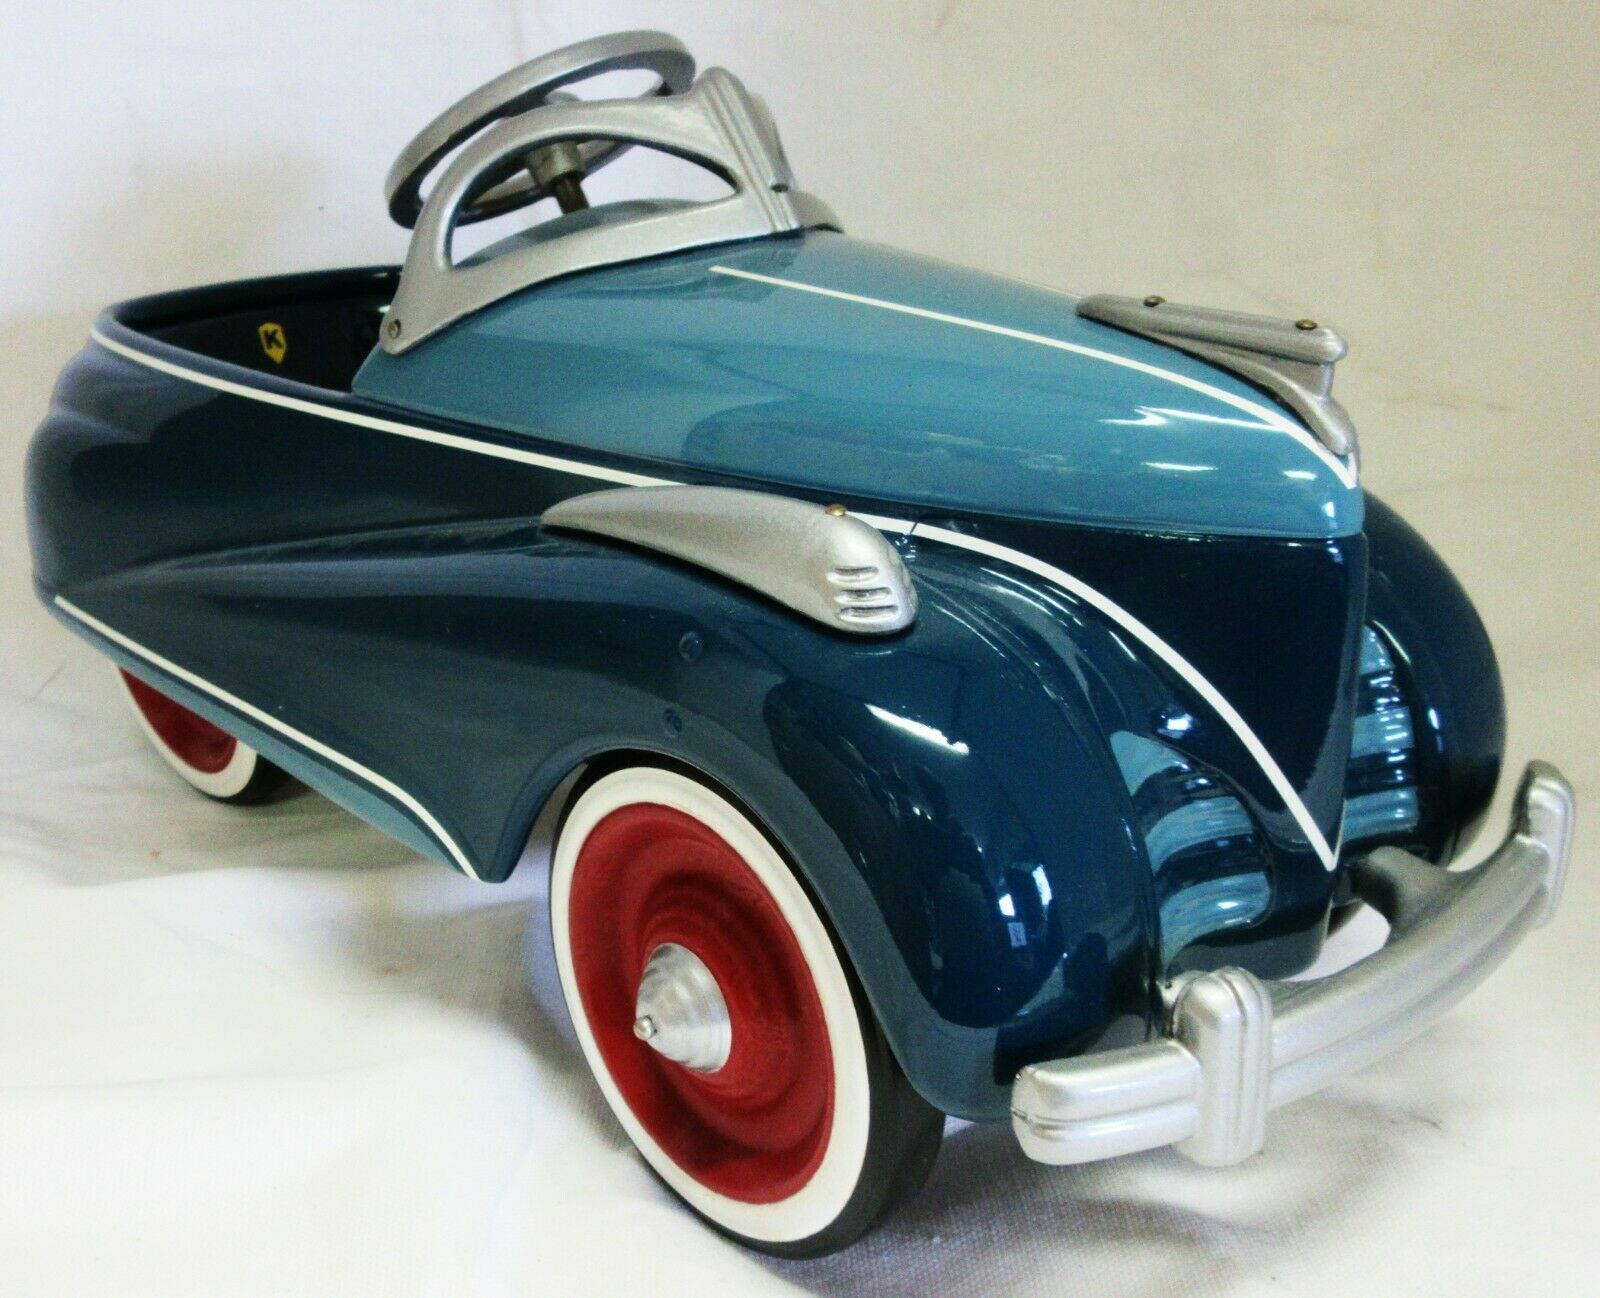 Primary image for Ken Kovack Prototype Pedal Car Blue #8/33